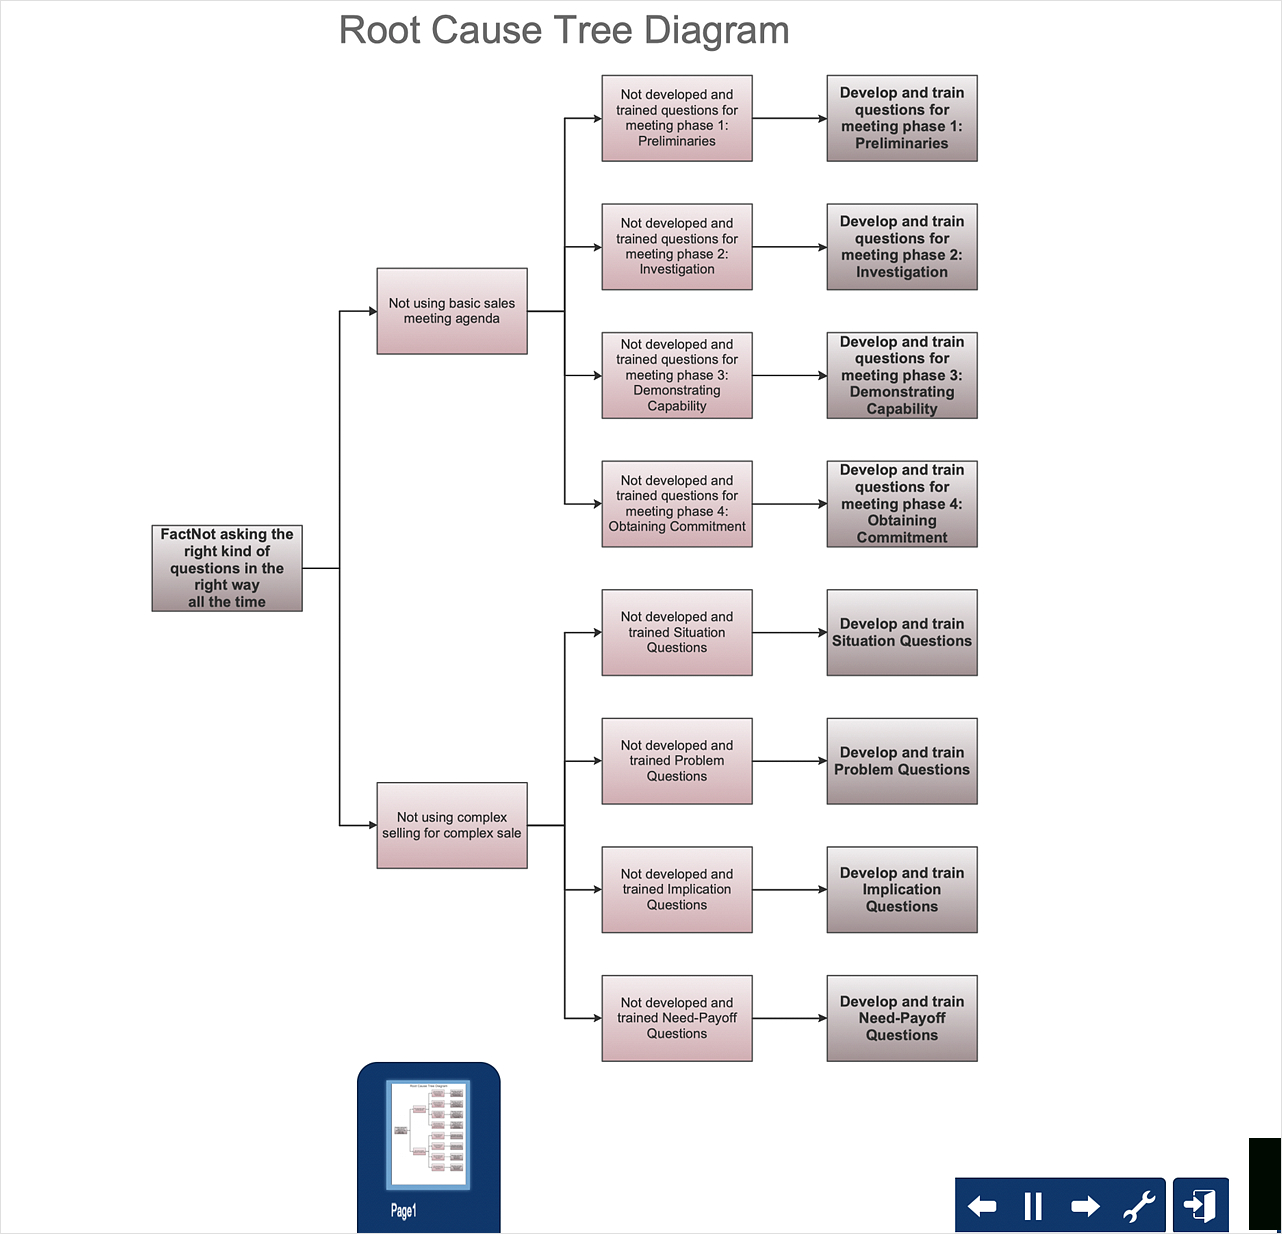 Root Cause Analysis Tree Diagram – Template | How To Create Within Blank Tree Diagram Template